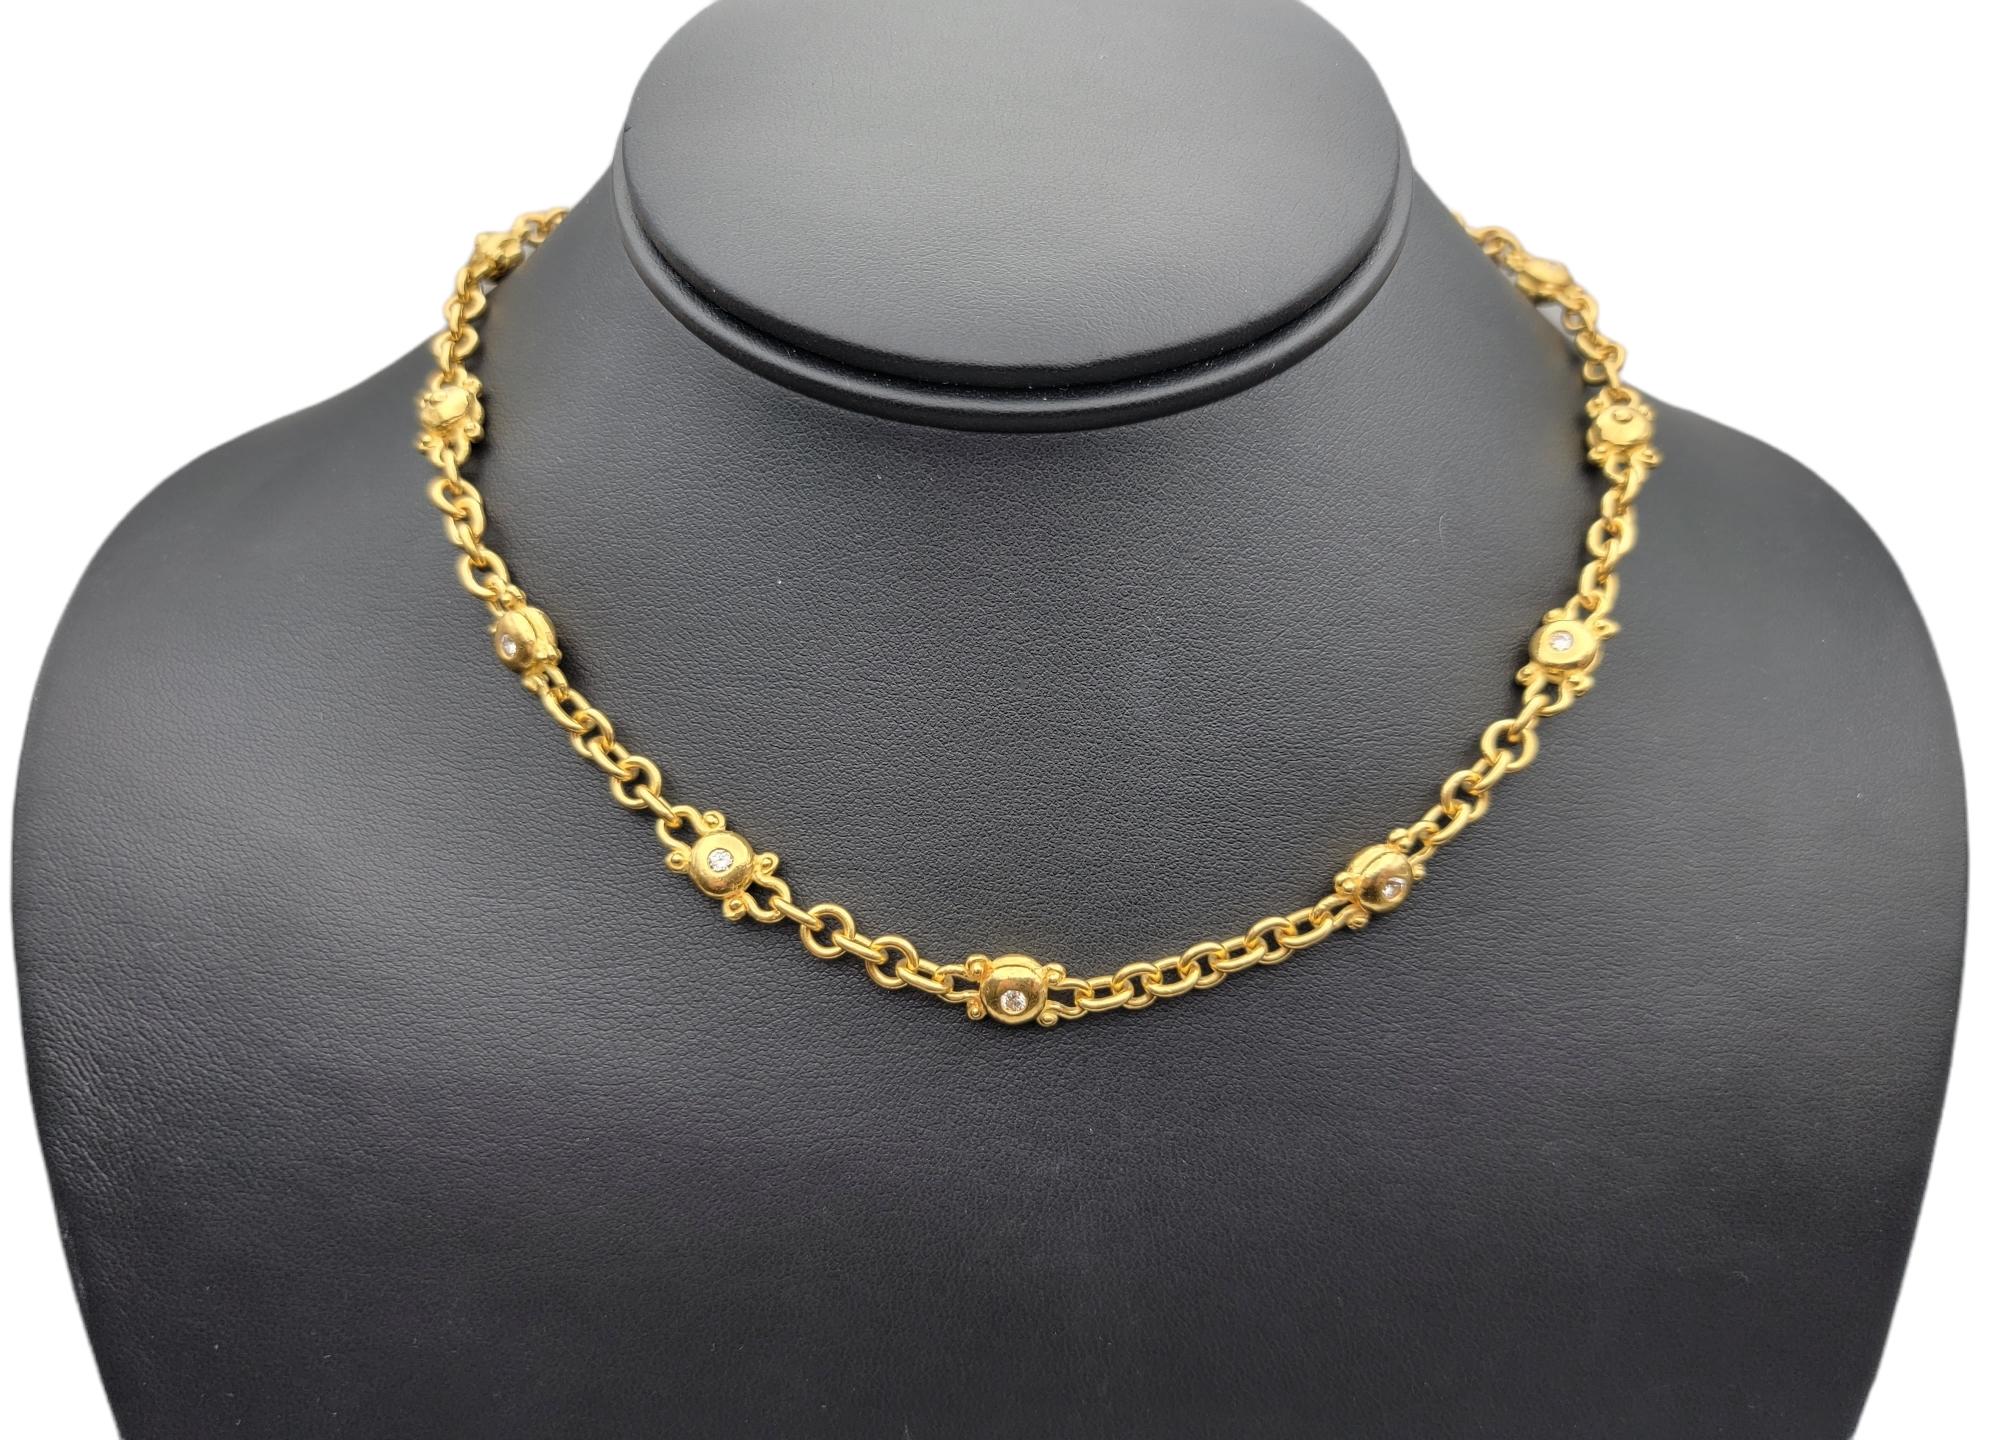 Denise Roberge 22 Karat Yellow Gold Bubble Link Necklace with Diamonds 3